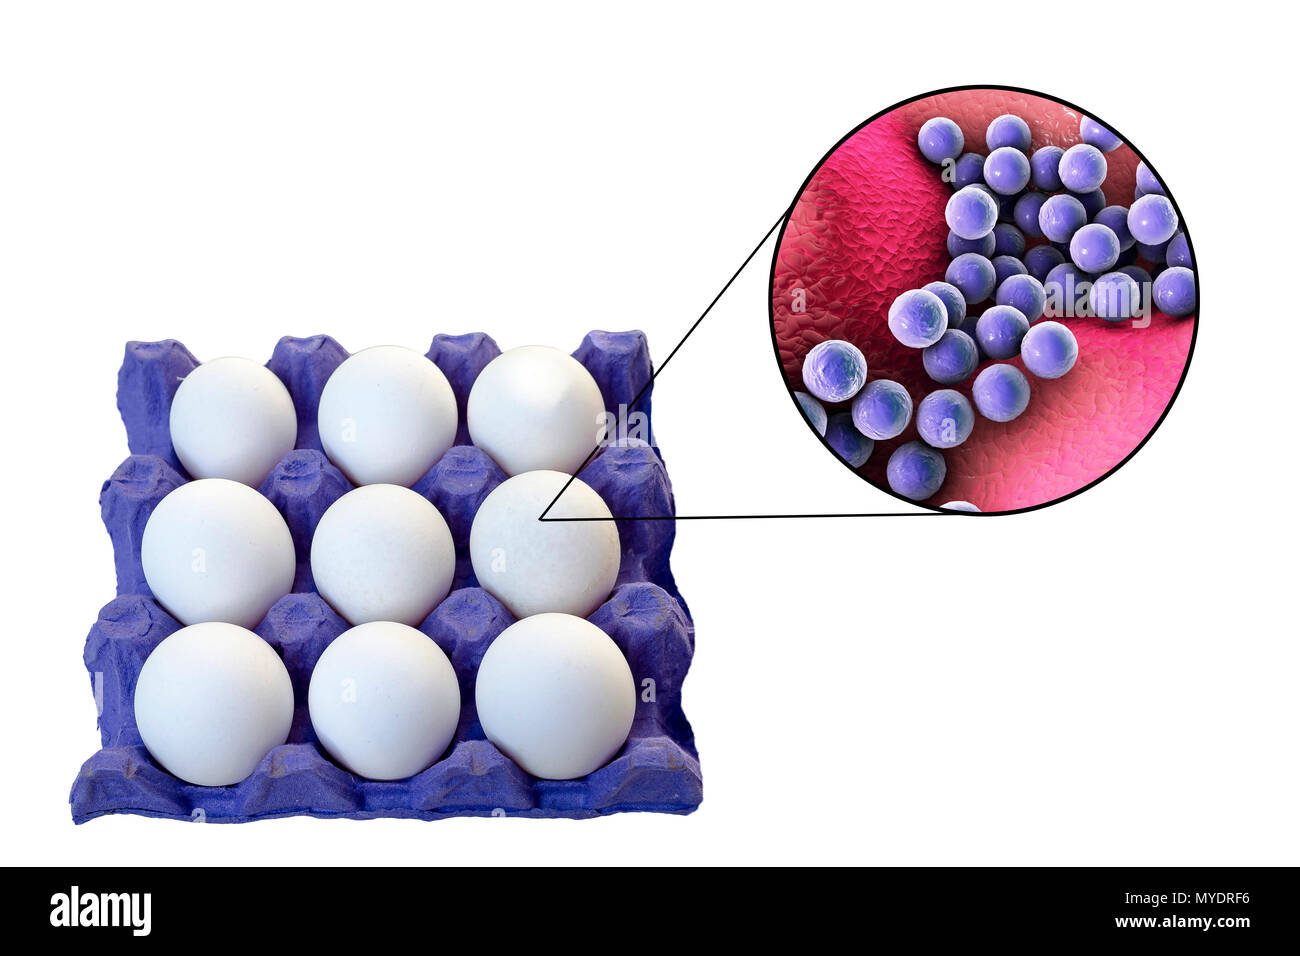 Chicken eggs as a source of staphylococcal food poisoning, conceptual illustration. Stock Photo